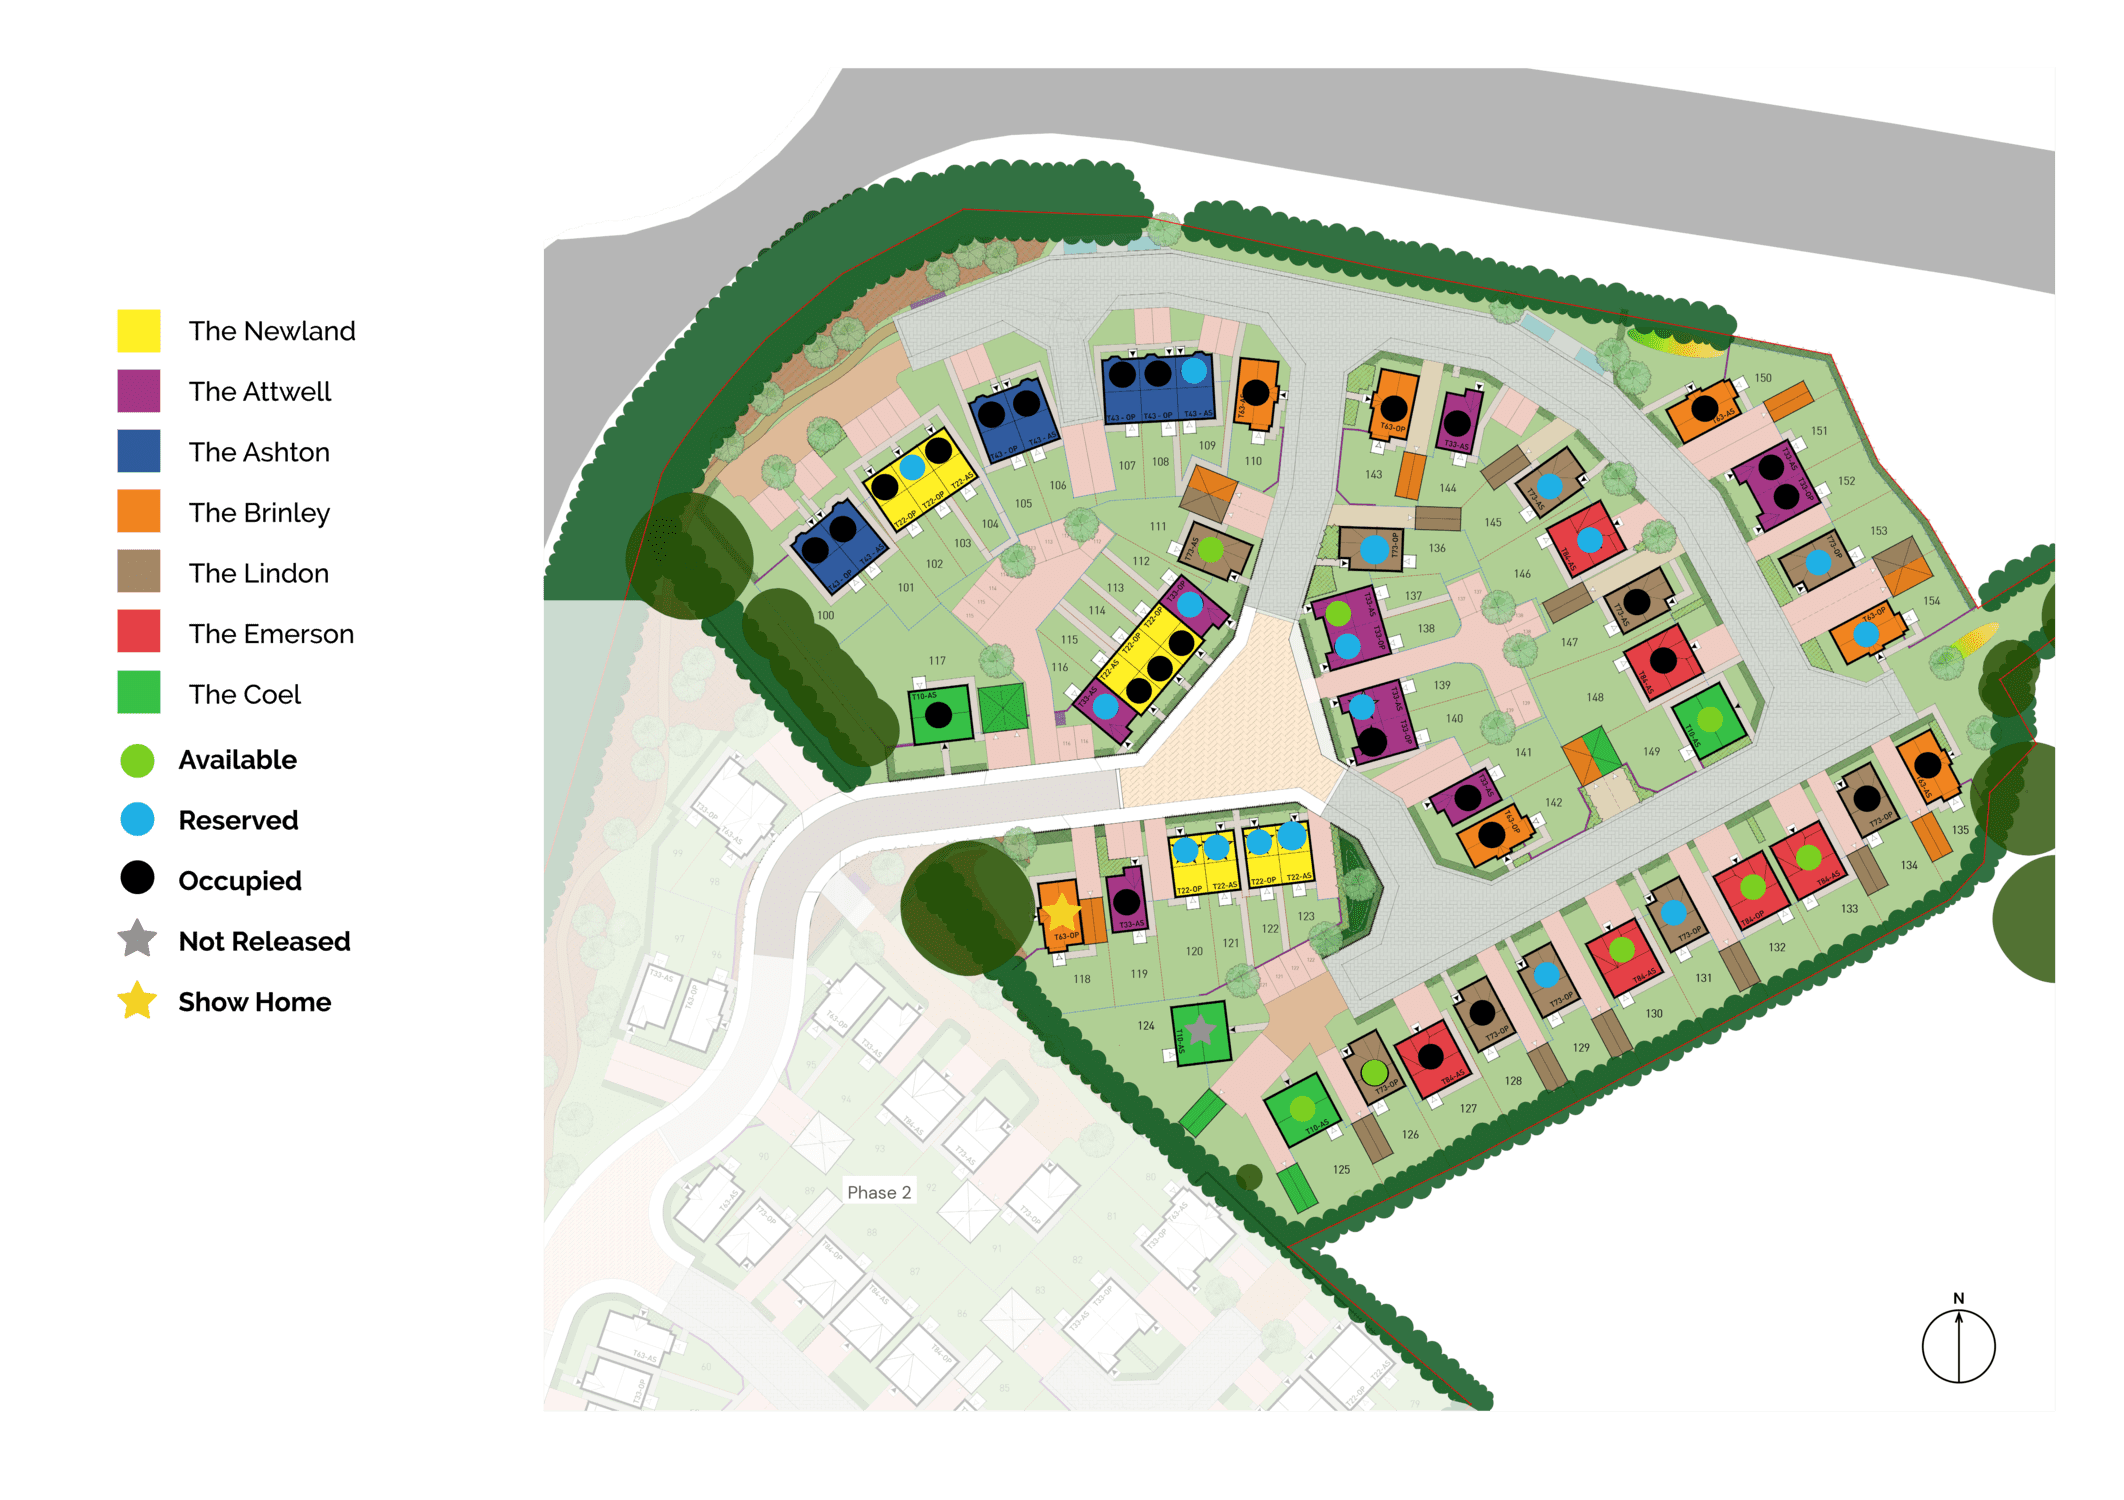 Site map showing plans for phase 3 of Hawthorne Meadows development